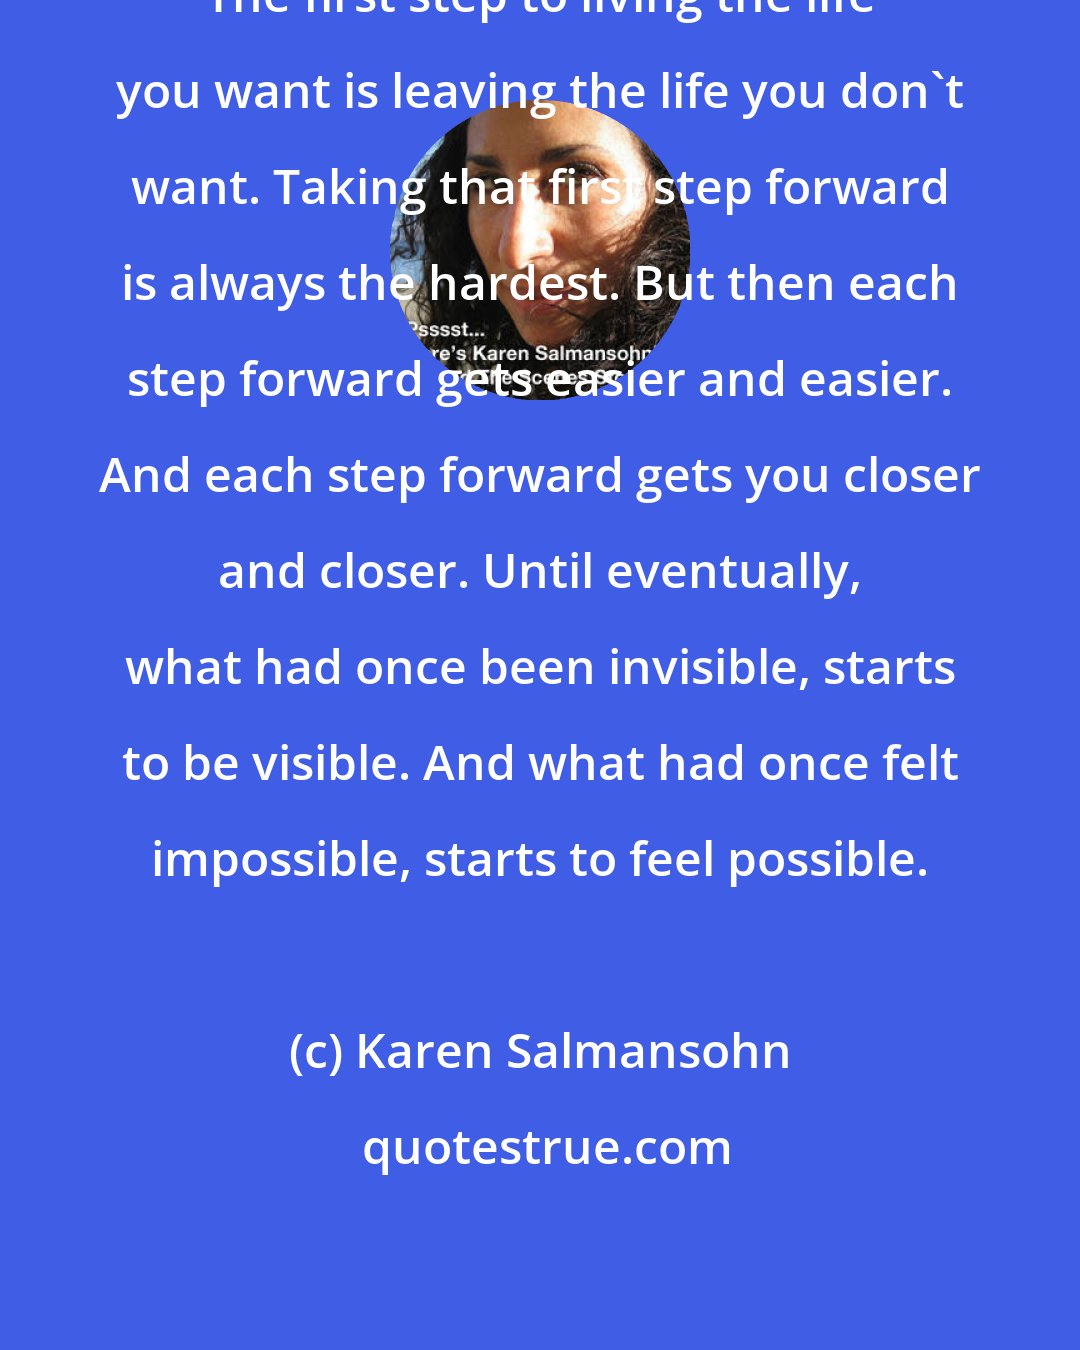 Karen Salmansohn: The first step to living the life you want is leaving the life you don't want. Taking that first step forward is always the hardest. But then each step forward gets easier and easier. And each step forward gets you closer and closer. Until eventually, what had once been invisible, starts to be visible. And what had once felt impossible, starts to feel possible.